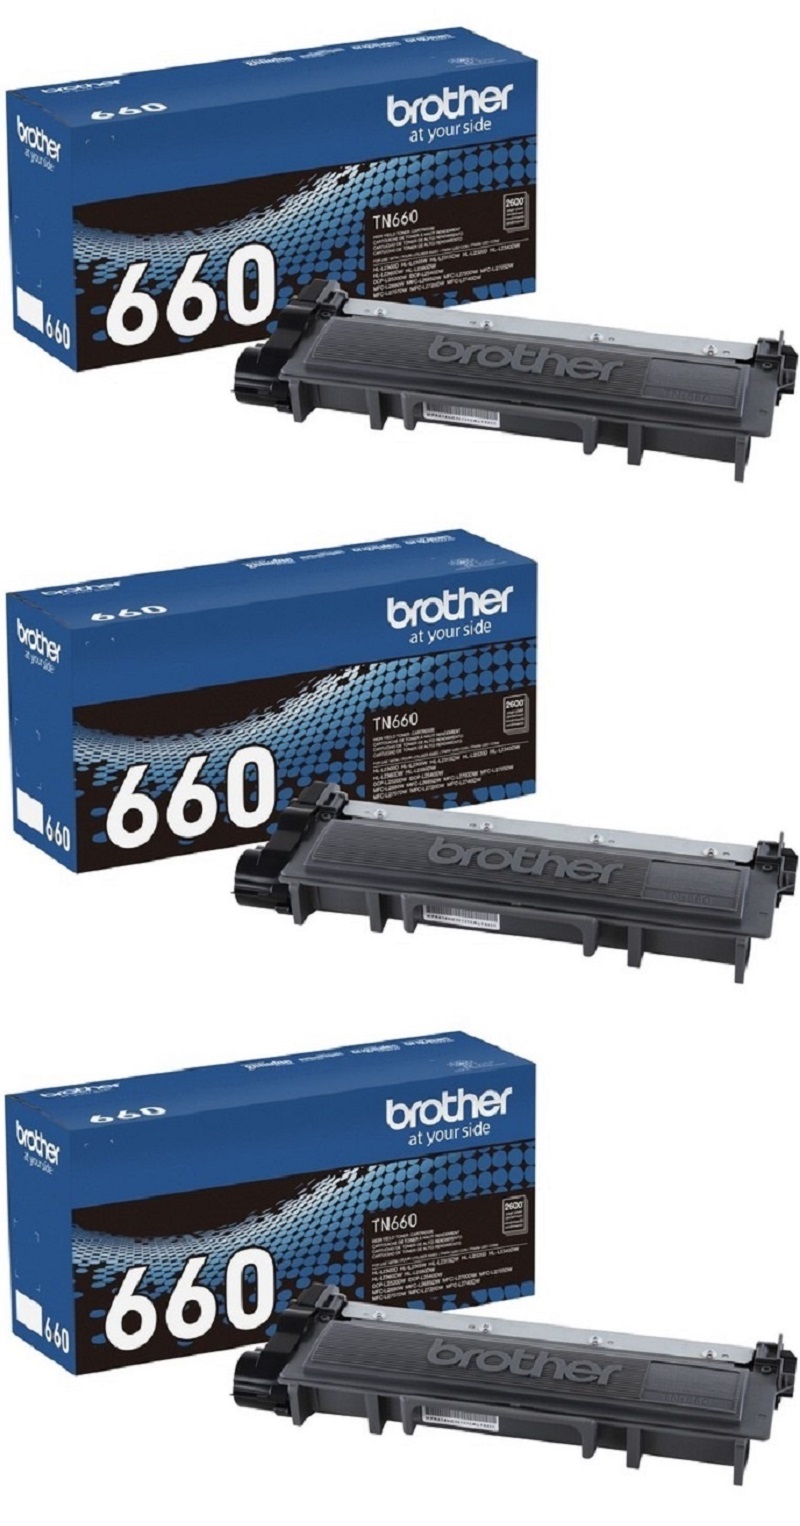 Brother Genuine High Yield Toner Cartridges, TN660, Replacement Black Toner Three Pack, Page Yield Up To 2,600 Pages/Cartridge - image 1 of 5